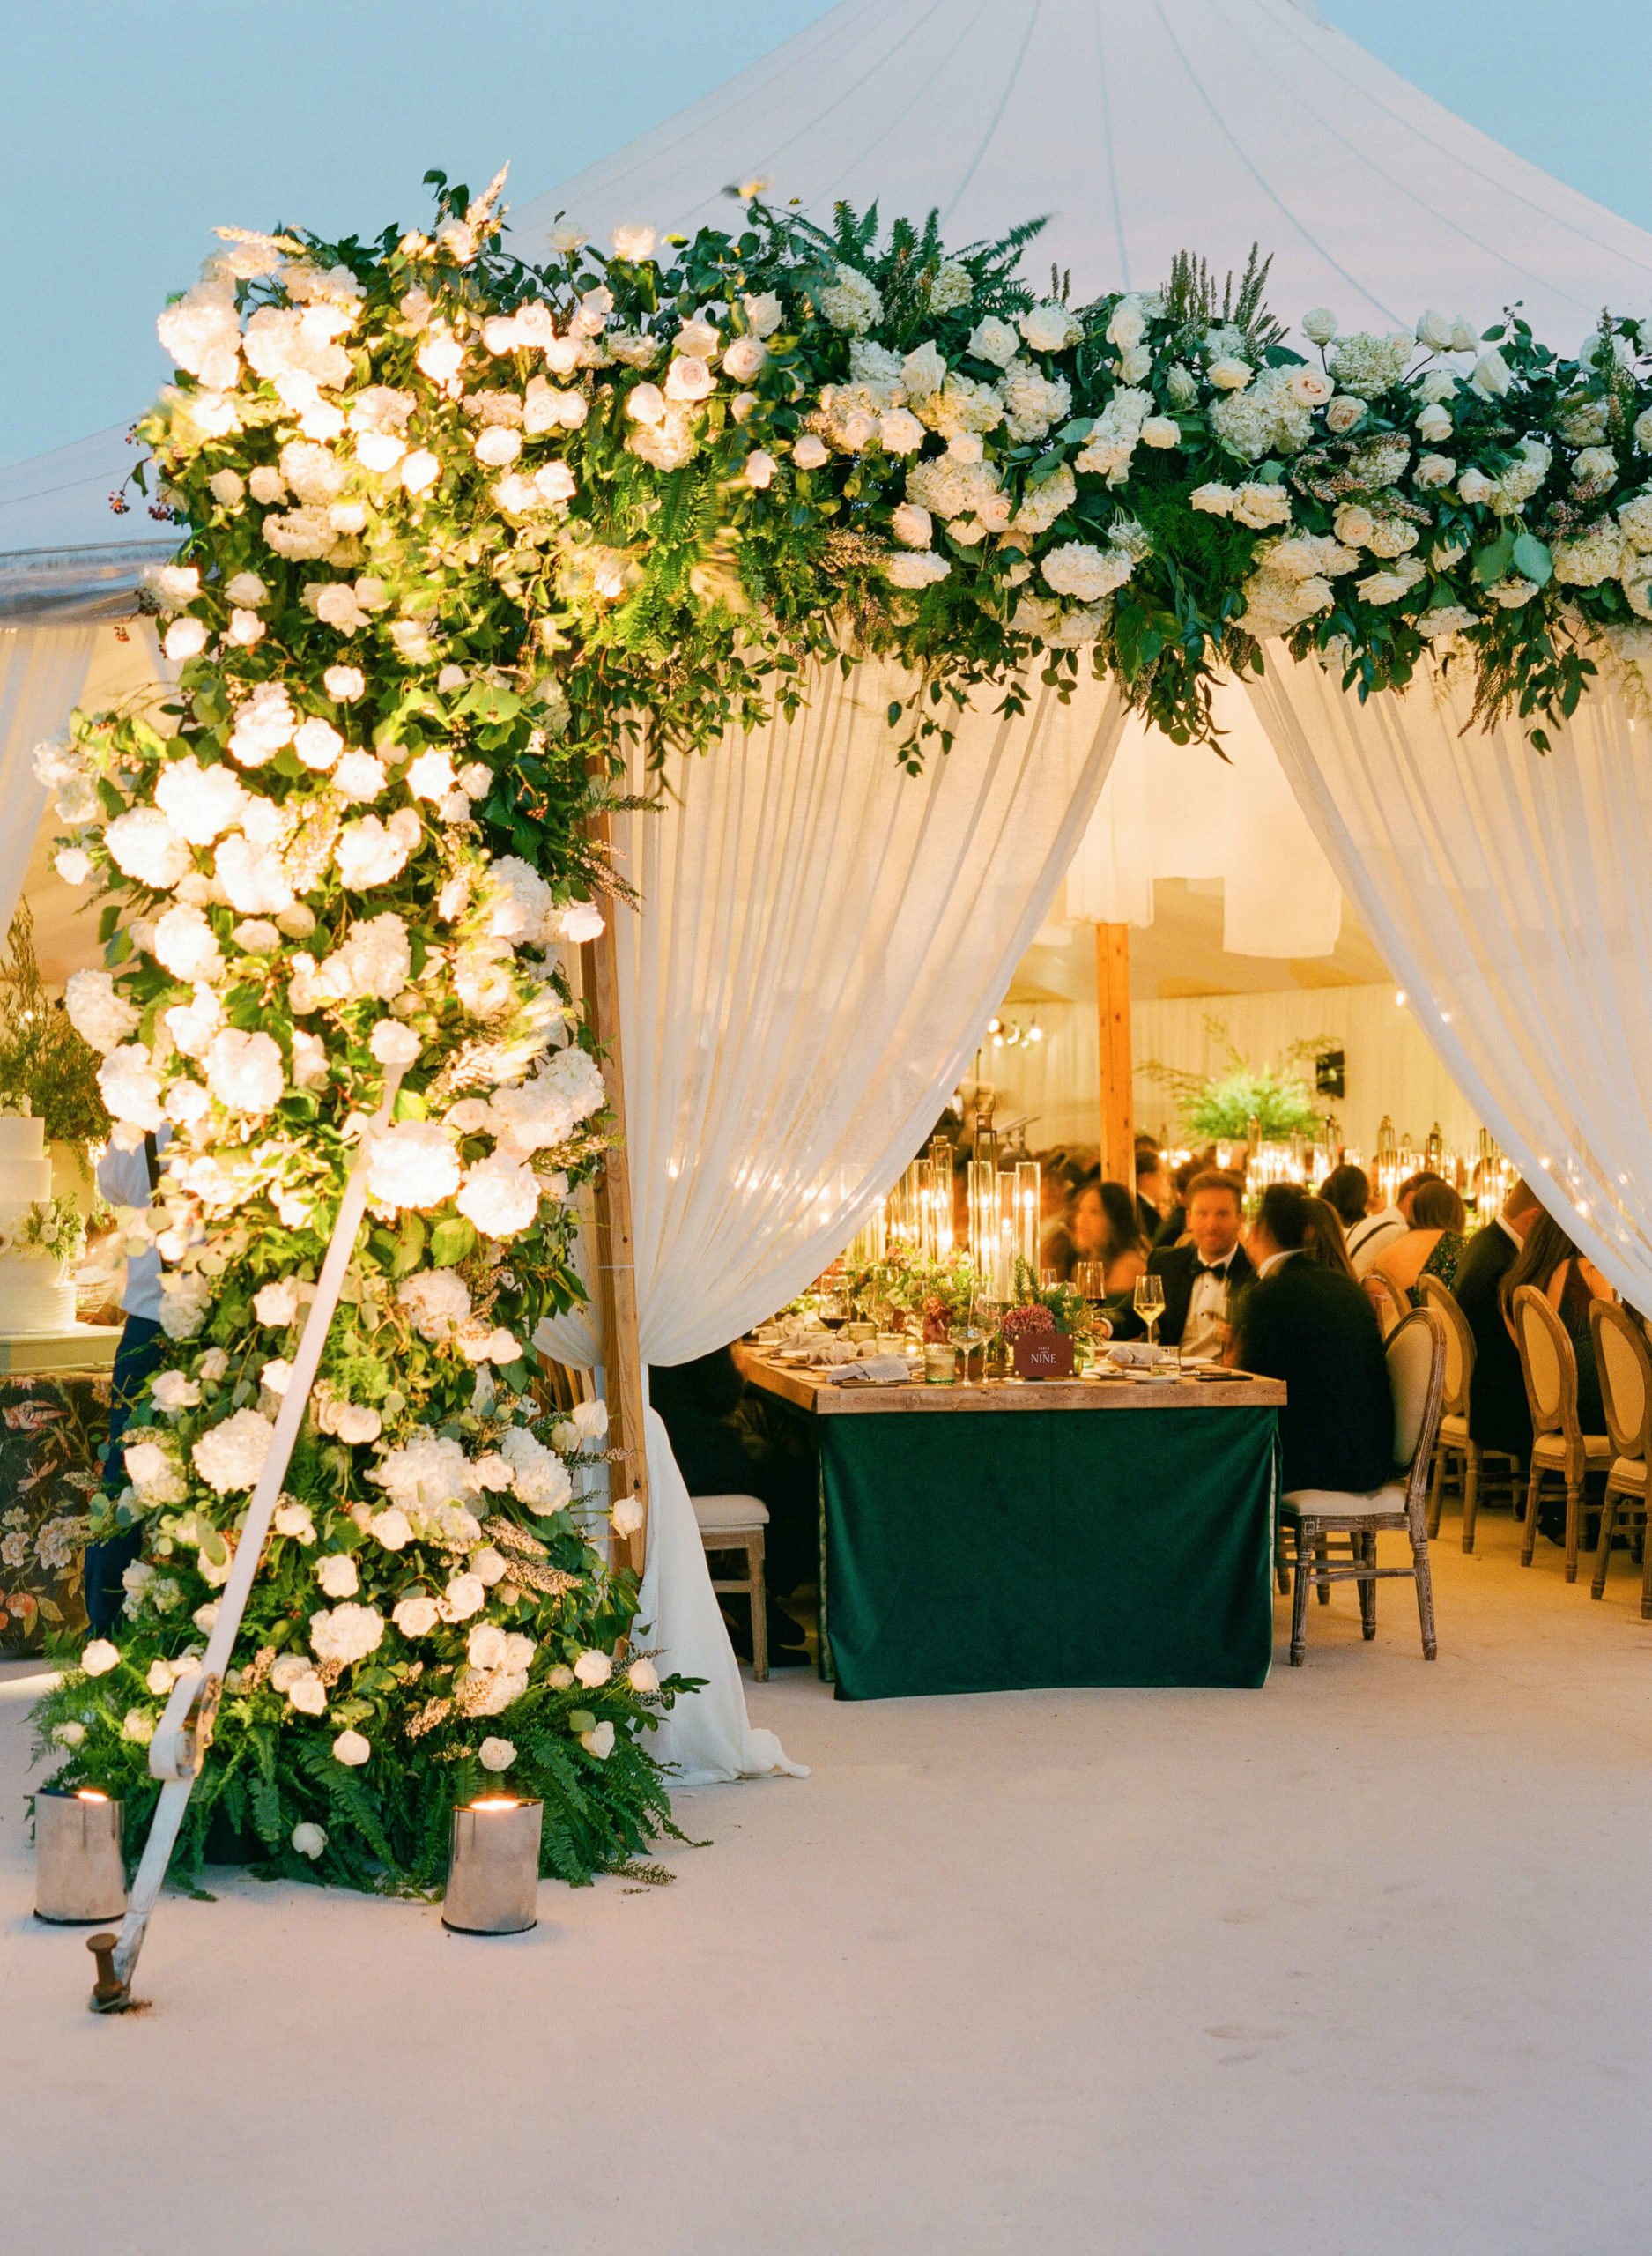 white floral archway at opening of dinner tent